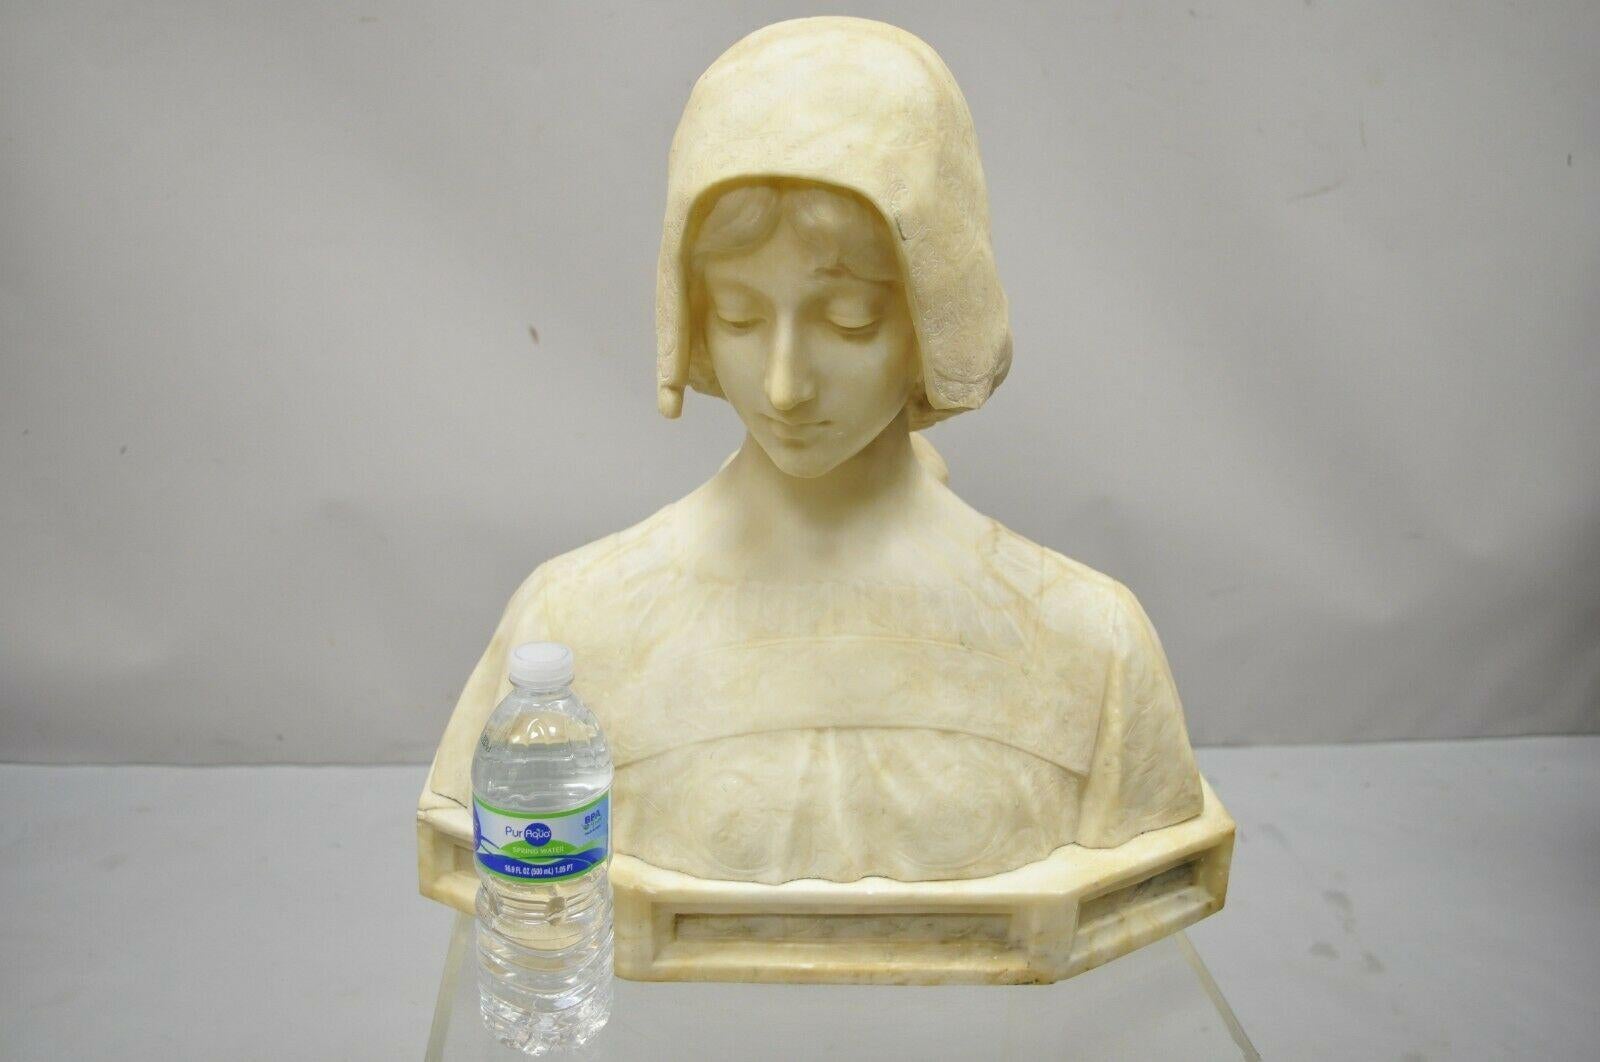 Angiolo Malavolti Carved Alabaster Antique Female Maiden Bust Sculpture Statue. Item features a signed to base, remarkable carving and detail, Angiolo Malavolti (Italian 1876-1947). Circa 1900. Measurements: 18